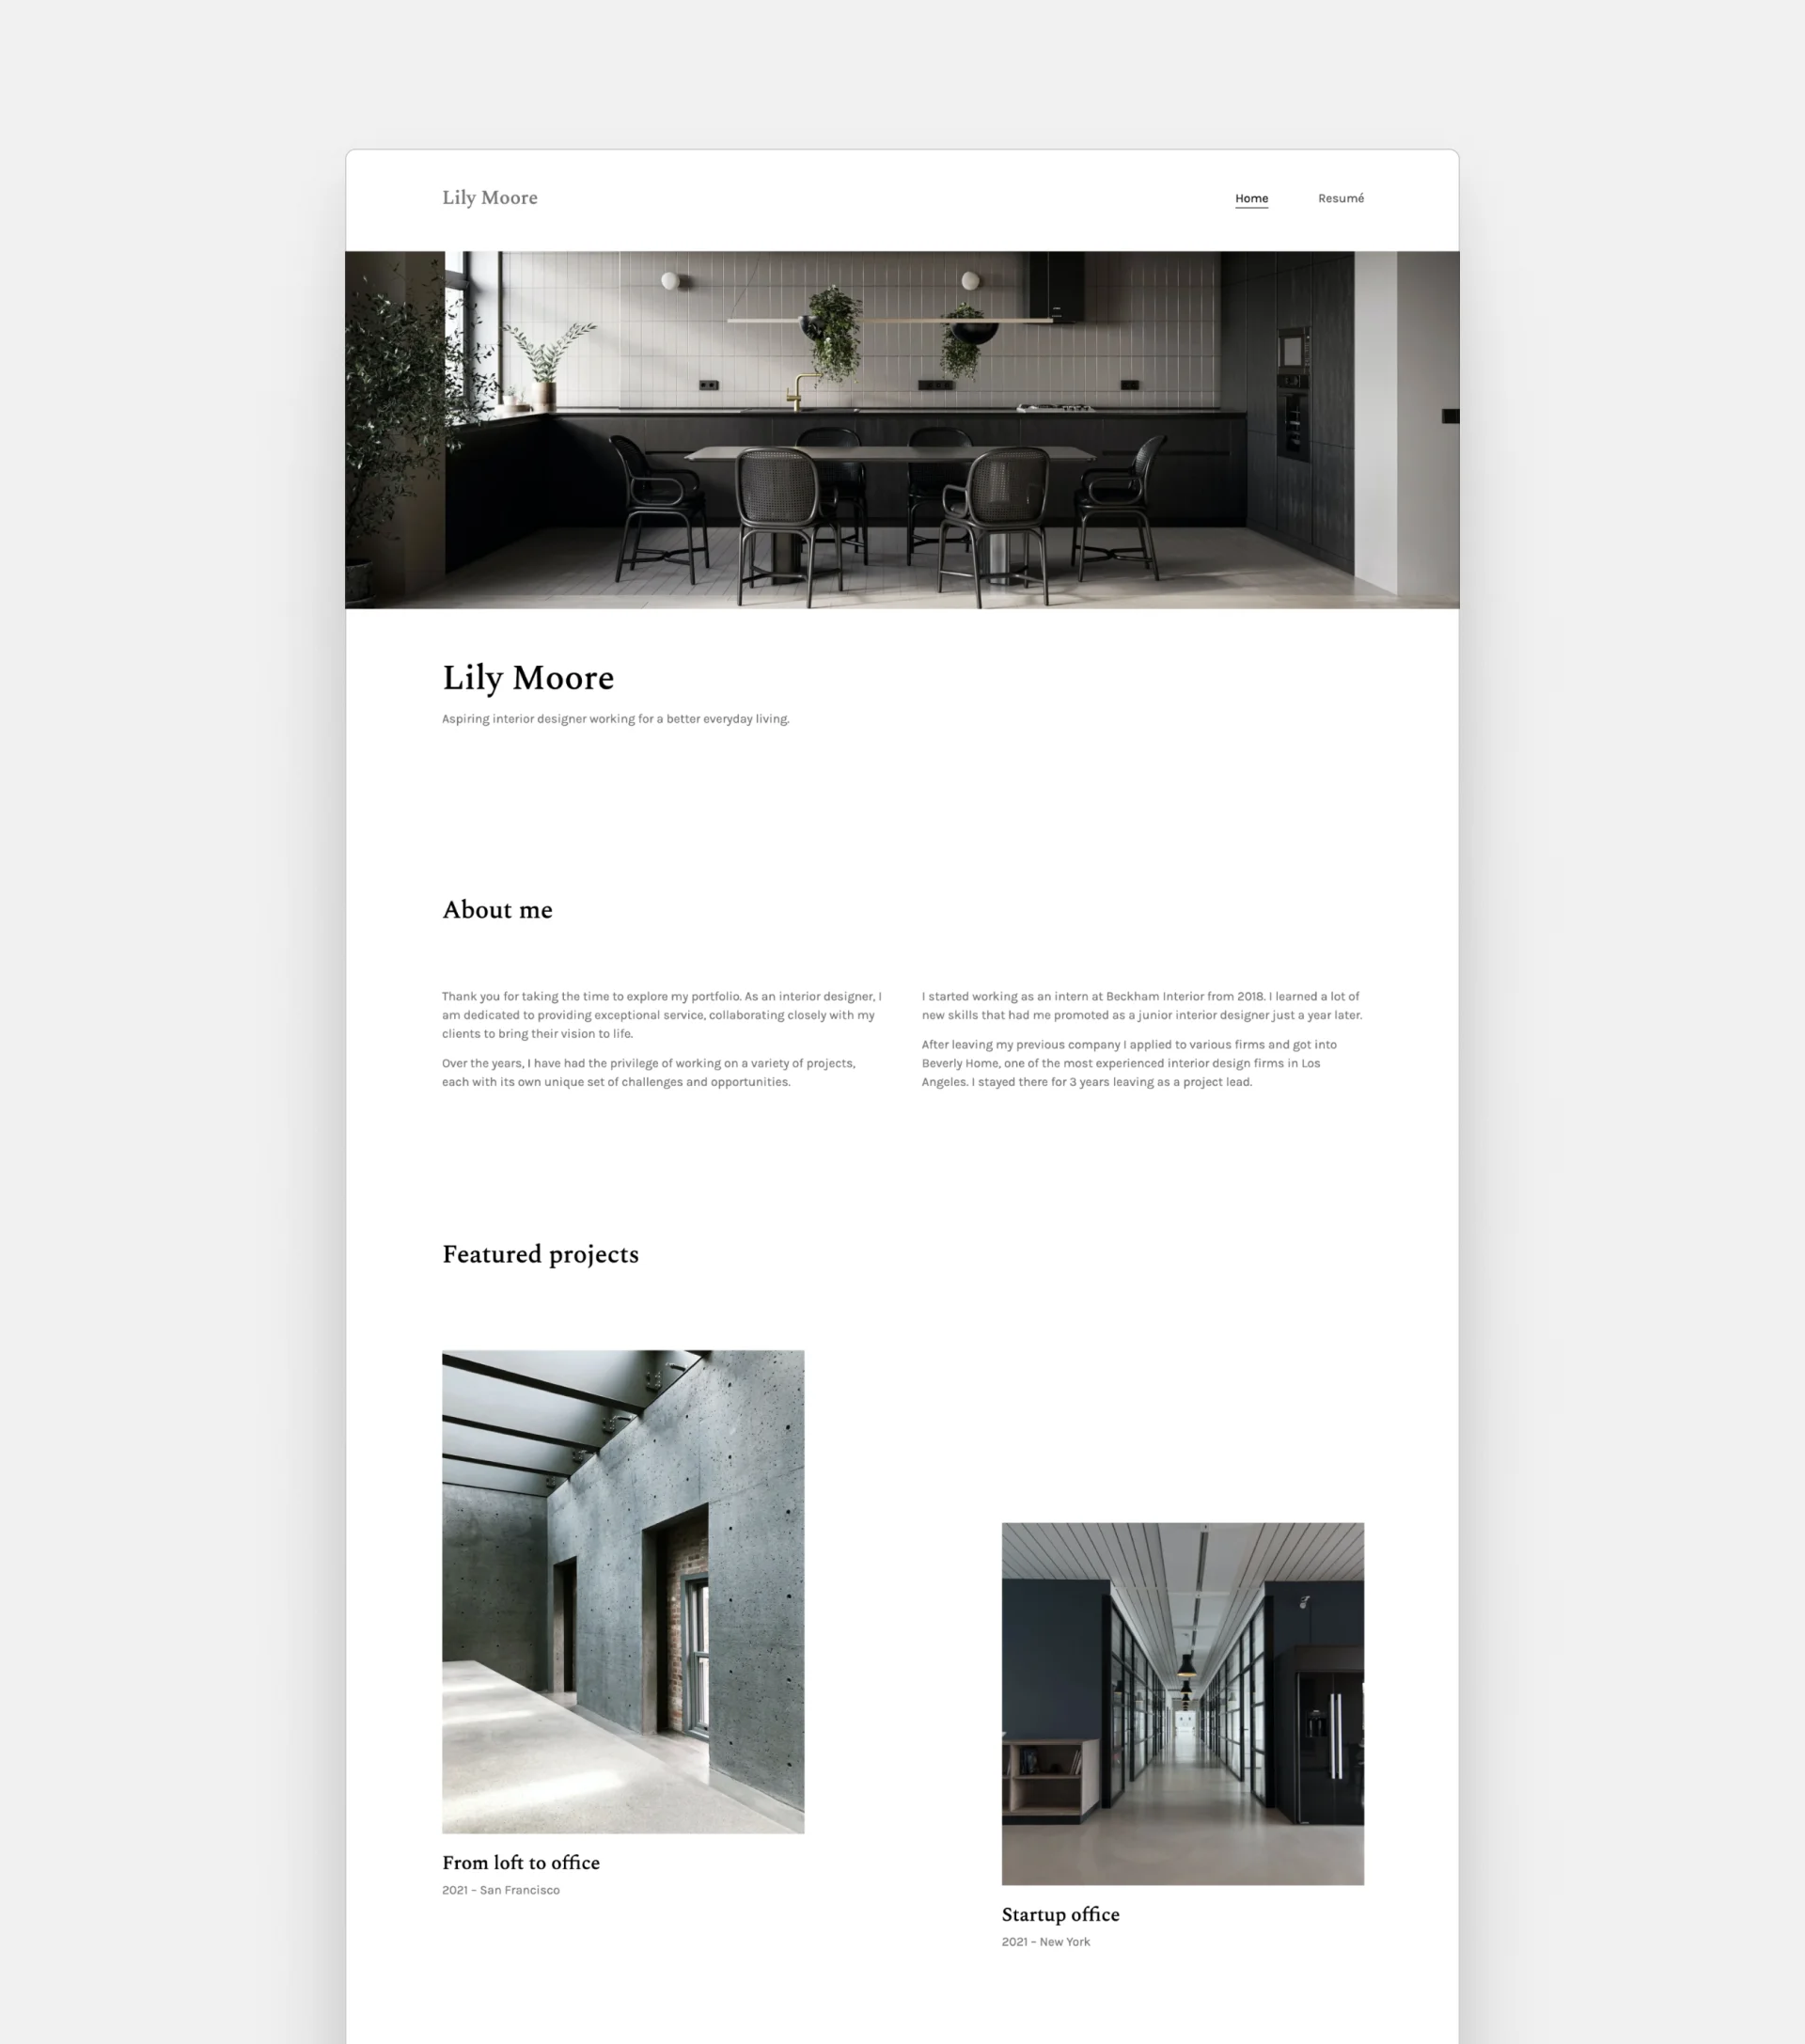 screenshot of Lily Moore's portfolio, which is a mock portfolio created with Archifolio